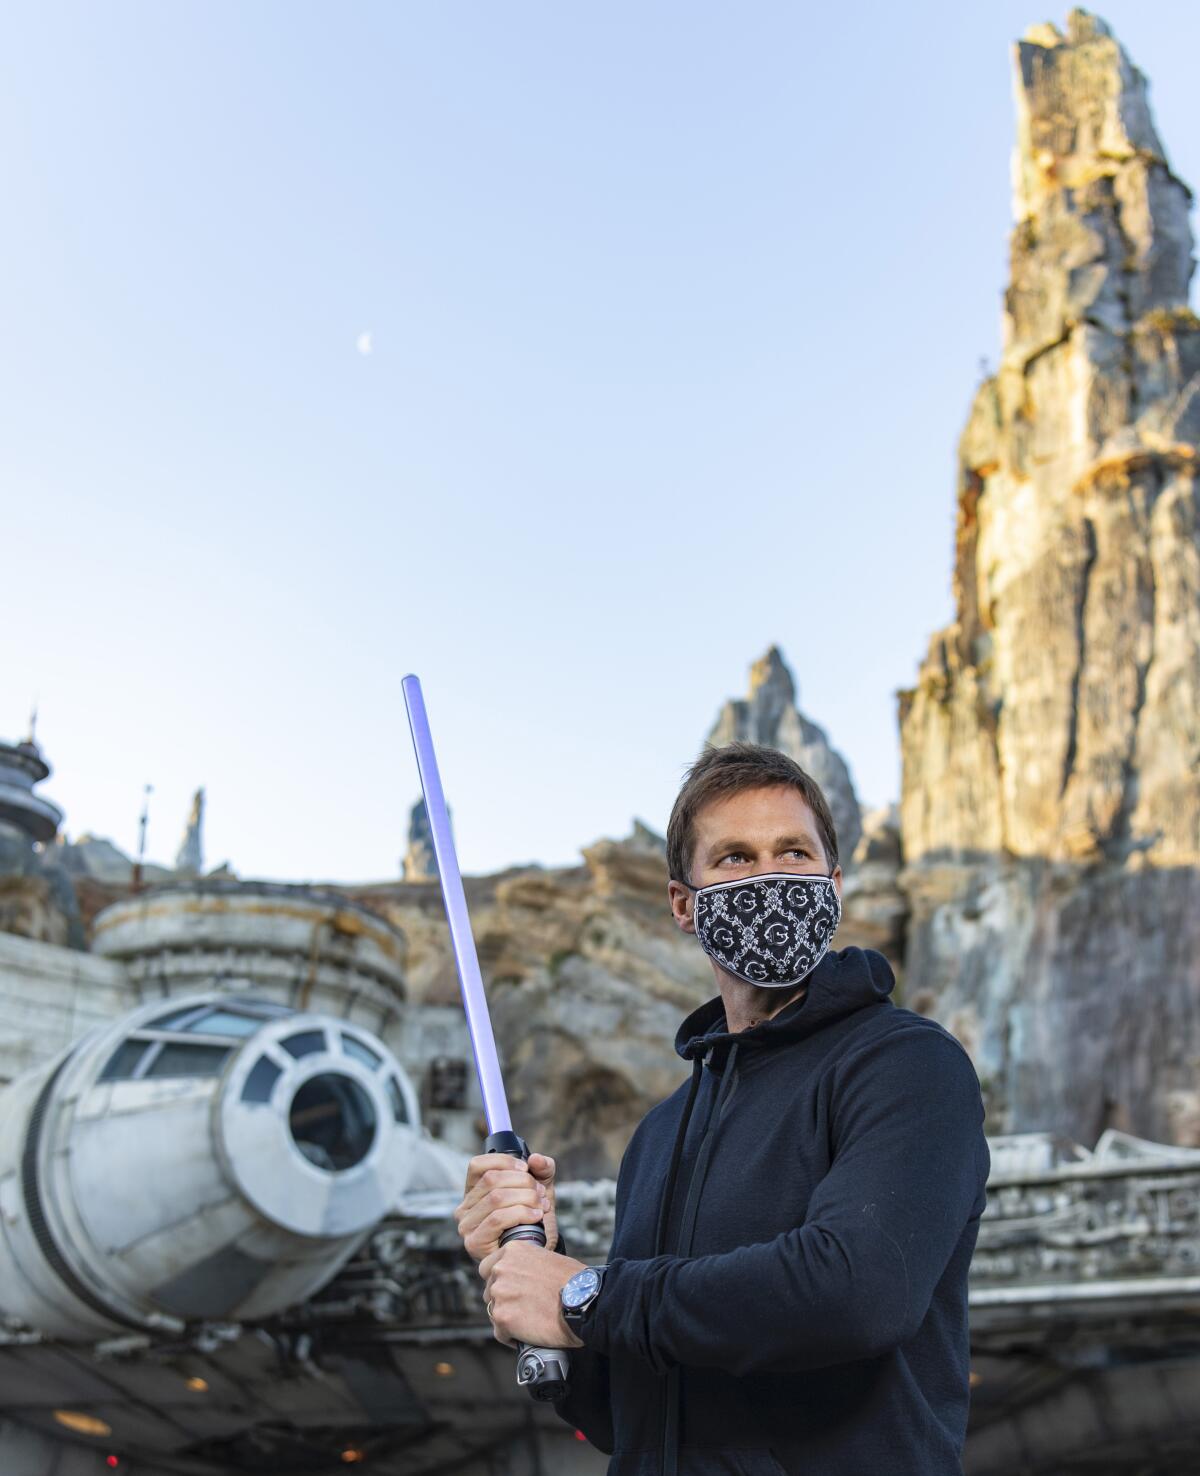 In this photo provided by Walt Disney World, NFL star Tom Brady visits Star Wars: Galaxy's Edge inside Disney's Hollywood Studios at Walt Disney World Resort in Lake Buena Vista, Fla., Monday, April 5, 2021. A mask-wearing Brady visited the Star Wars-themed section of Walt Disney World with his family and friends, two months after he led the Bucs to a Super Bowl win against the Chiefs. (Matt Stroshane/Disney World via AP)